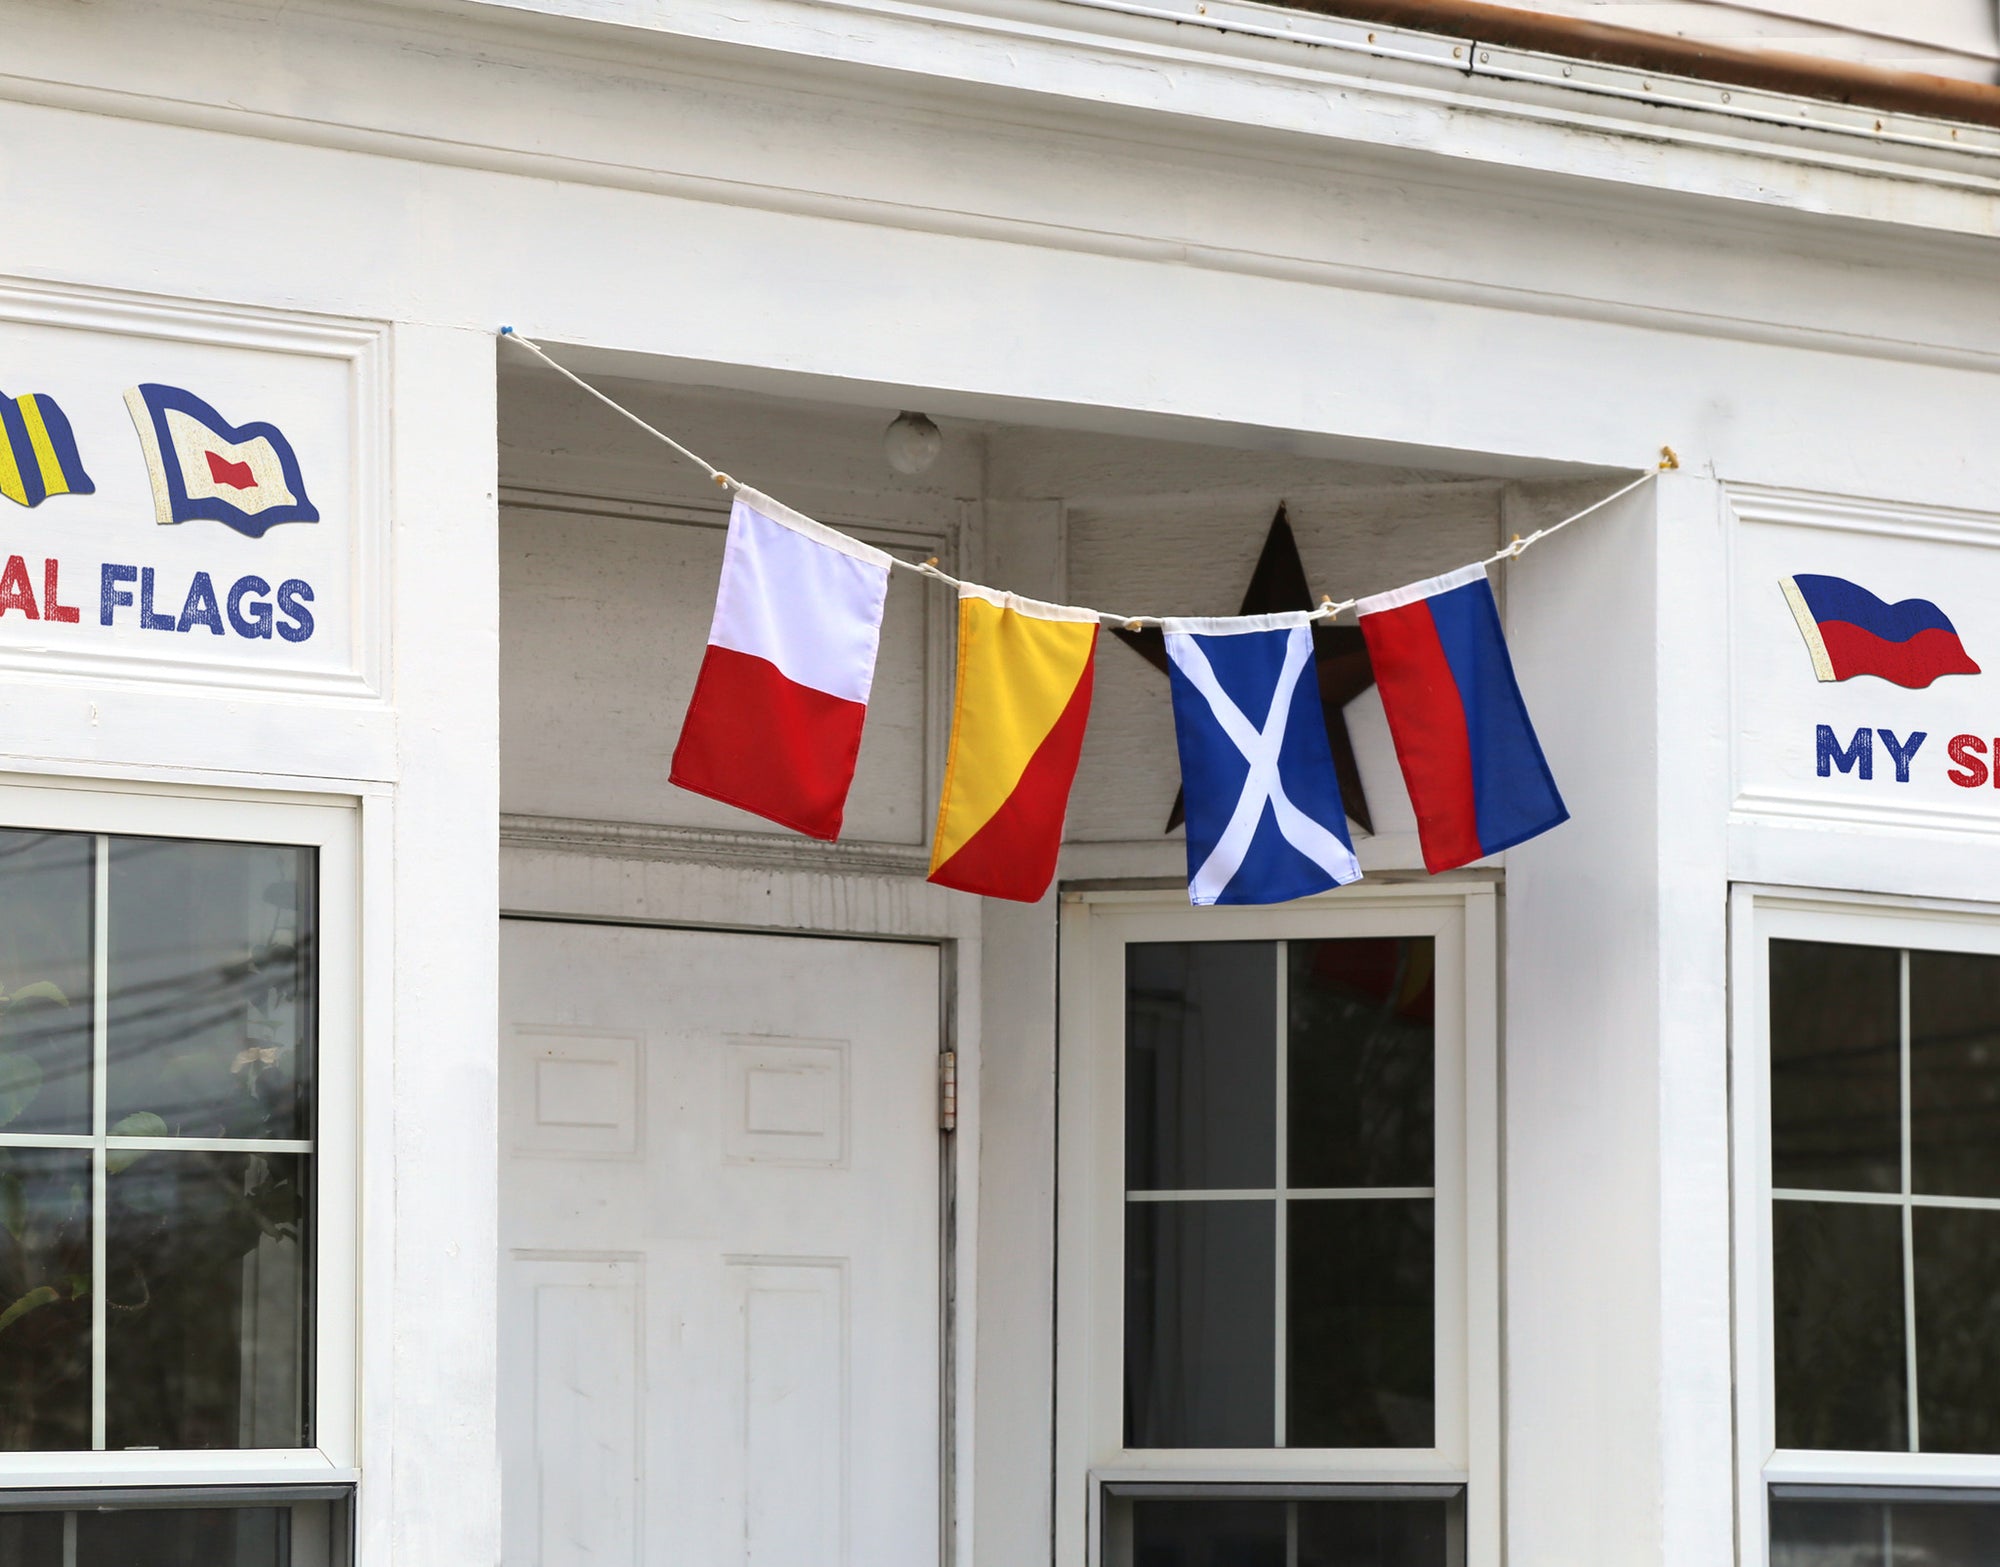 My Signal Flags home